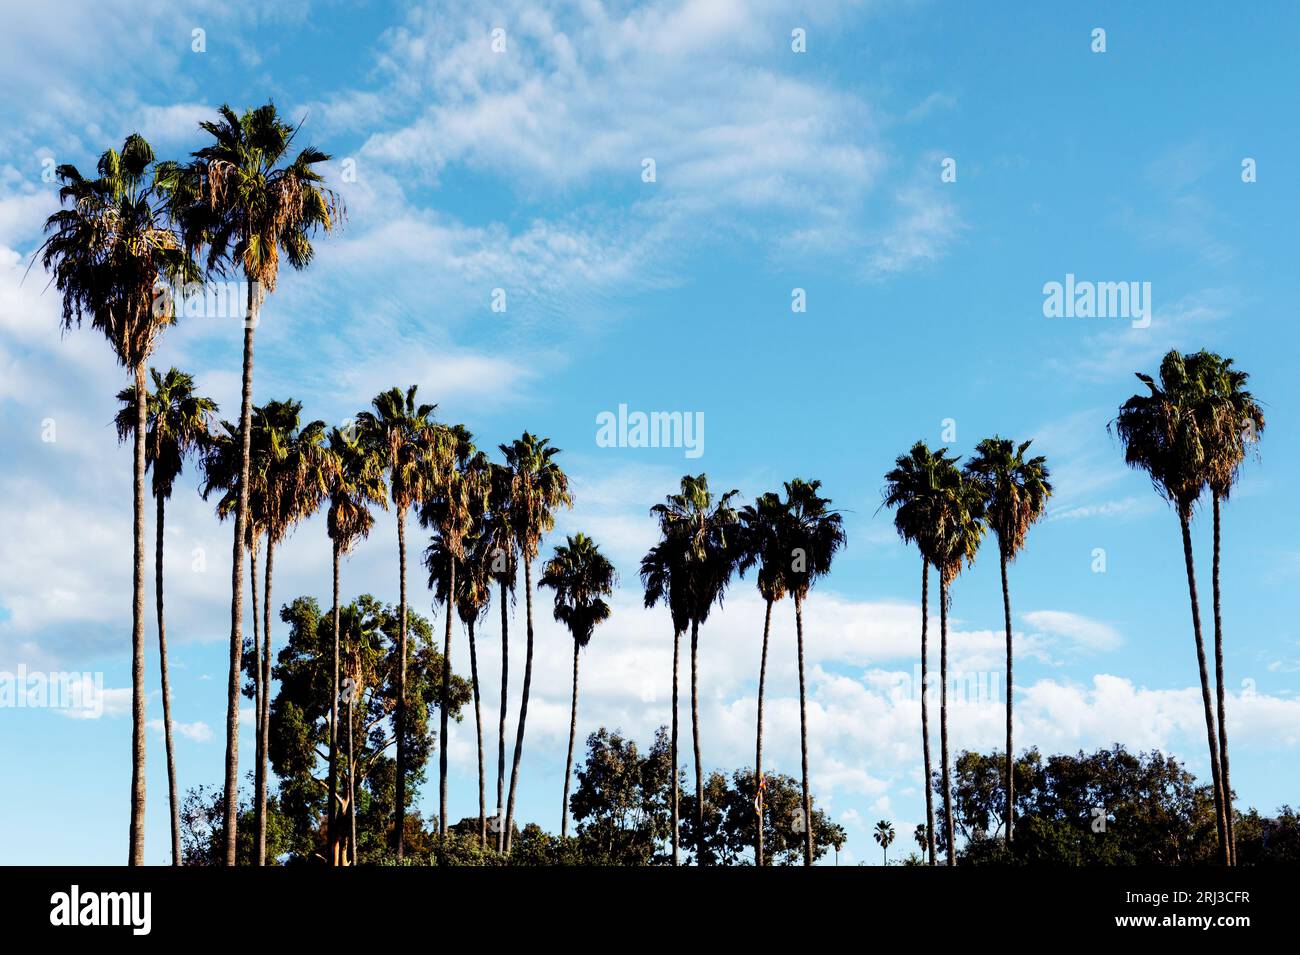 Group of California palm trees against blue sky and white clouds Stock Photo